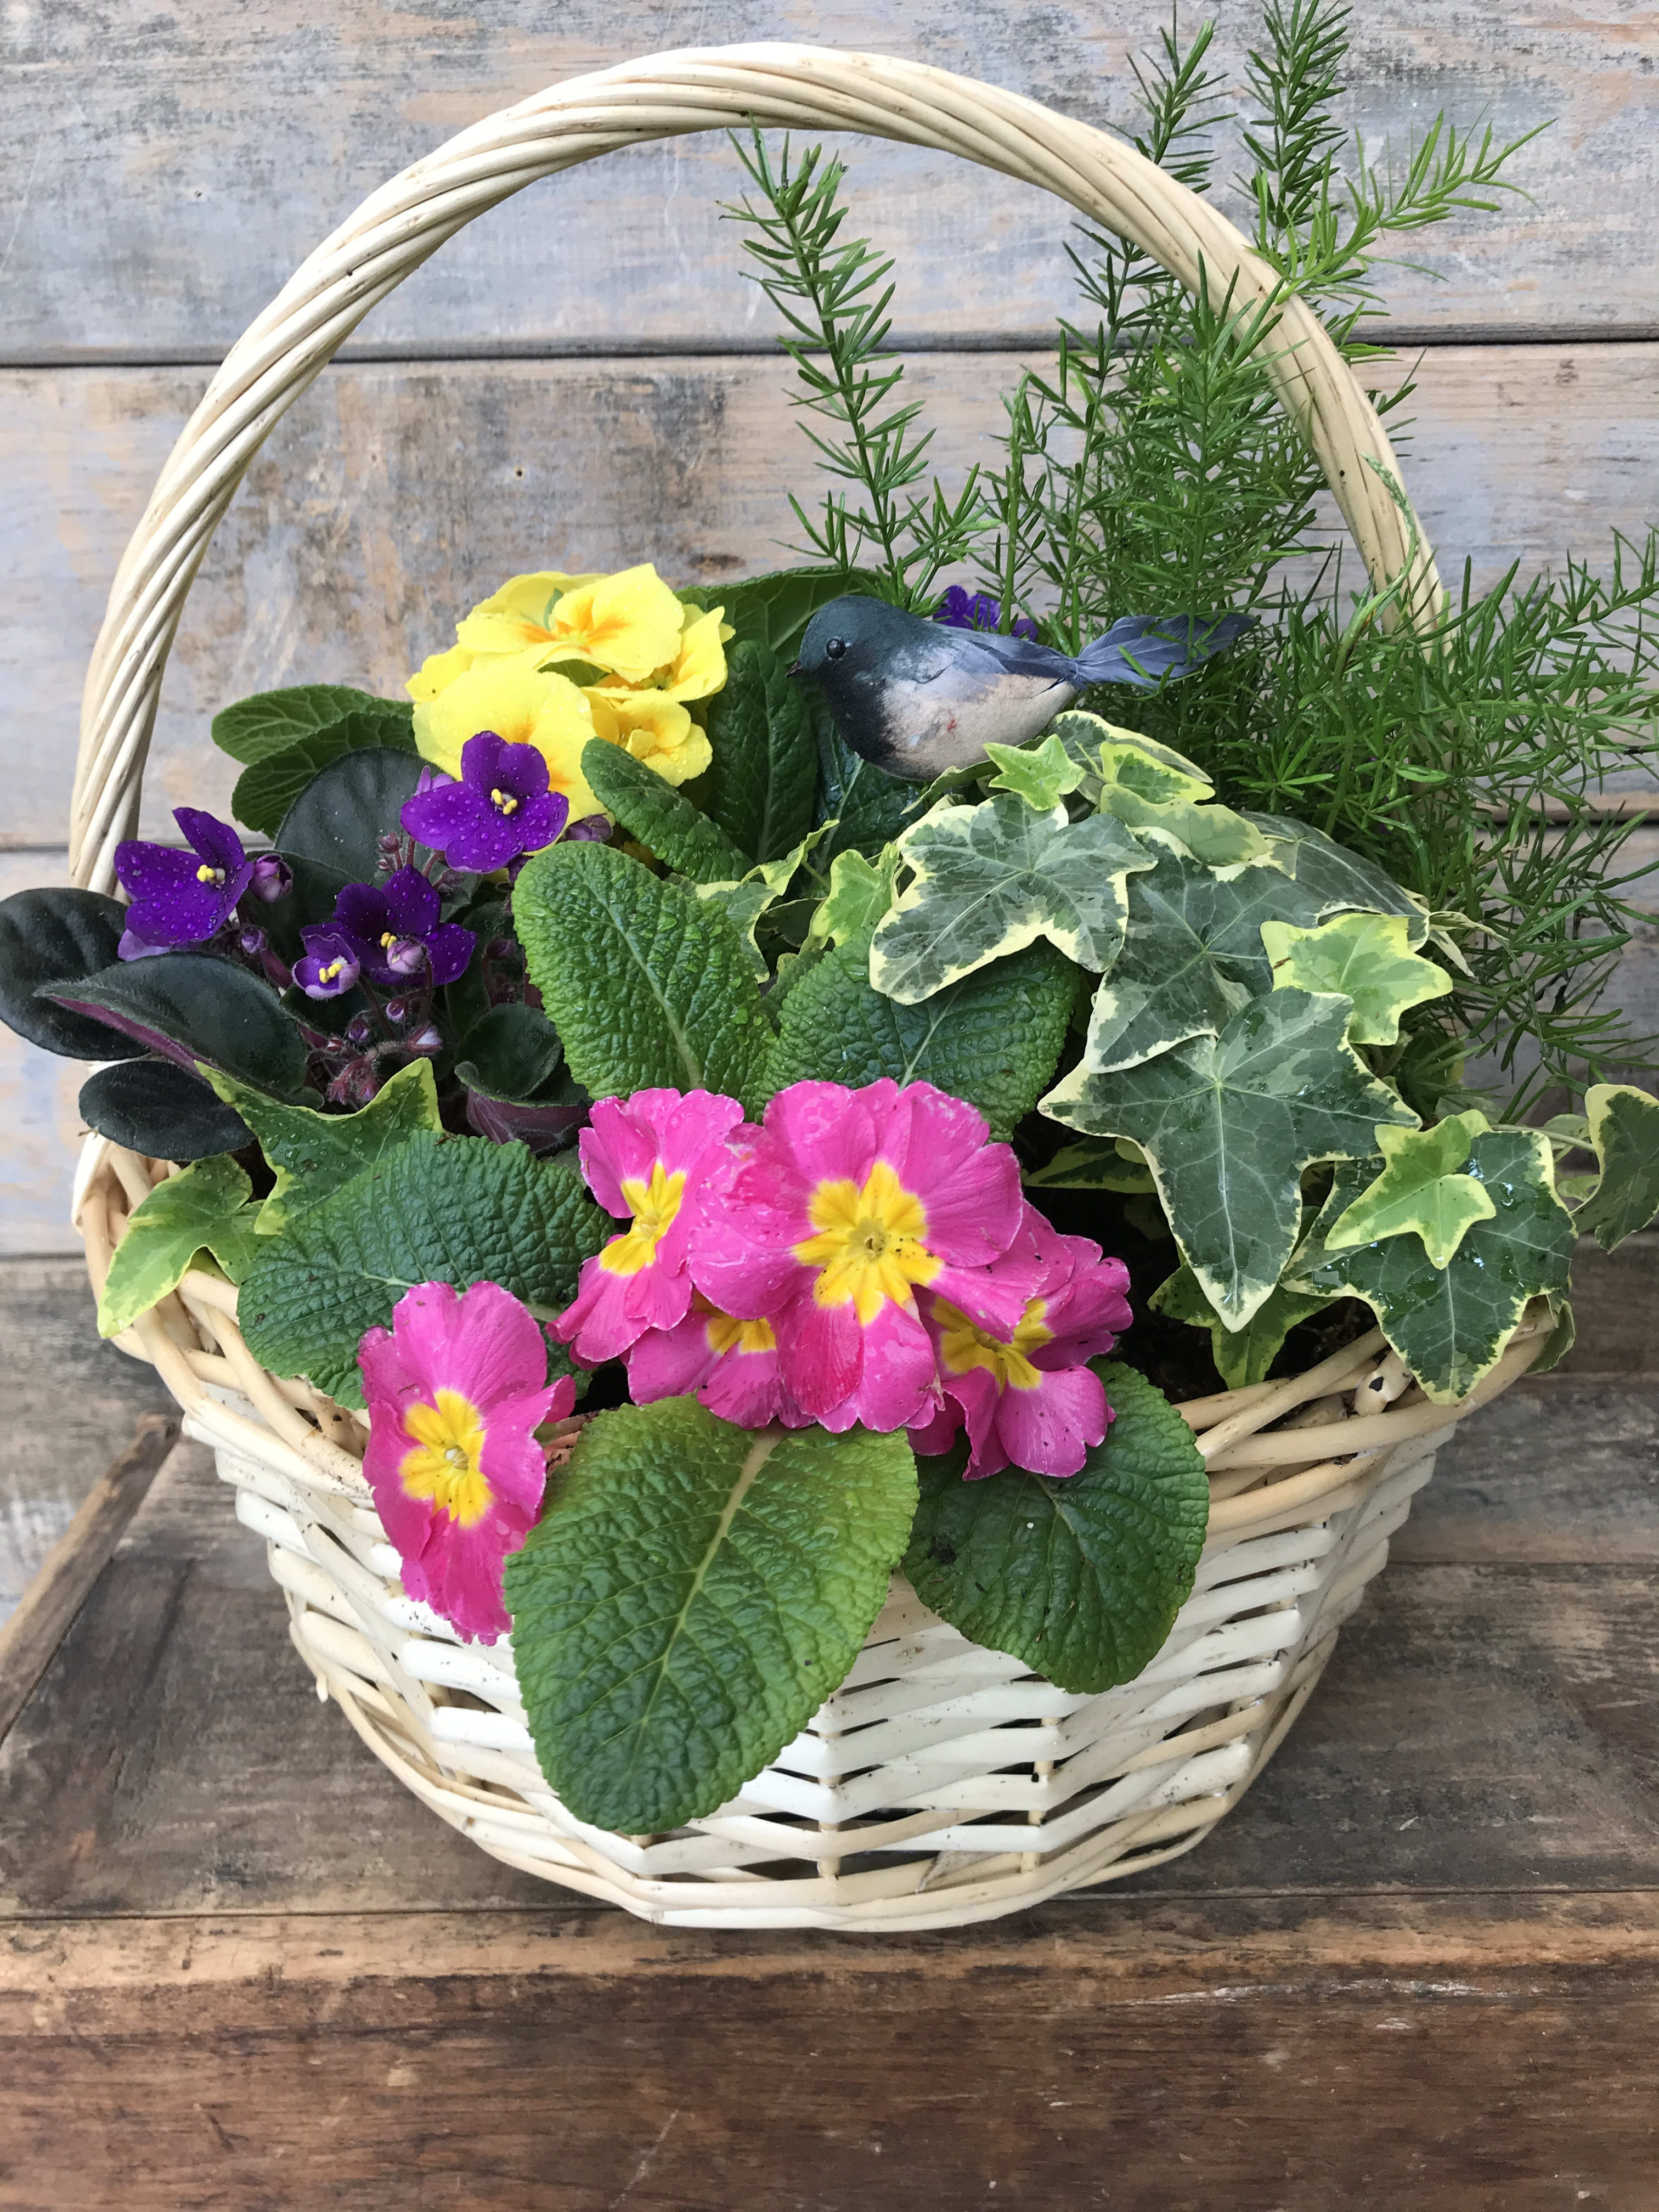 Basket of flowering and green plants - Green and flowering plants in an attractive basket, seasonal.